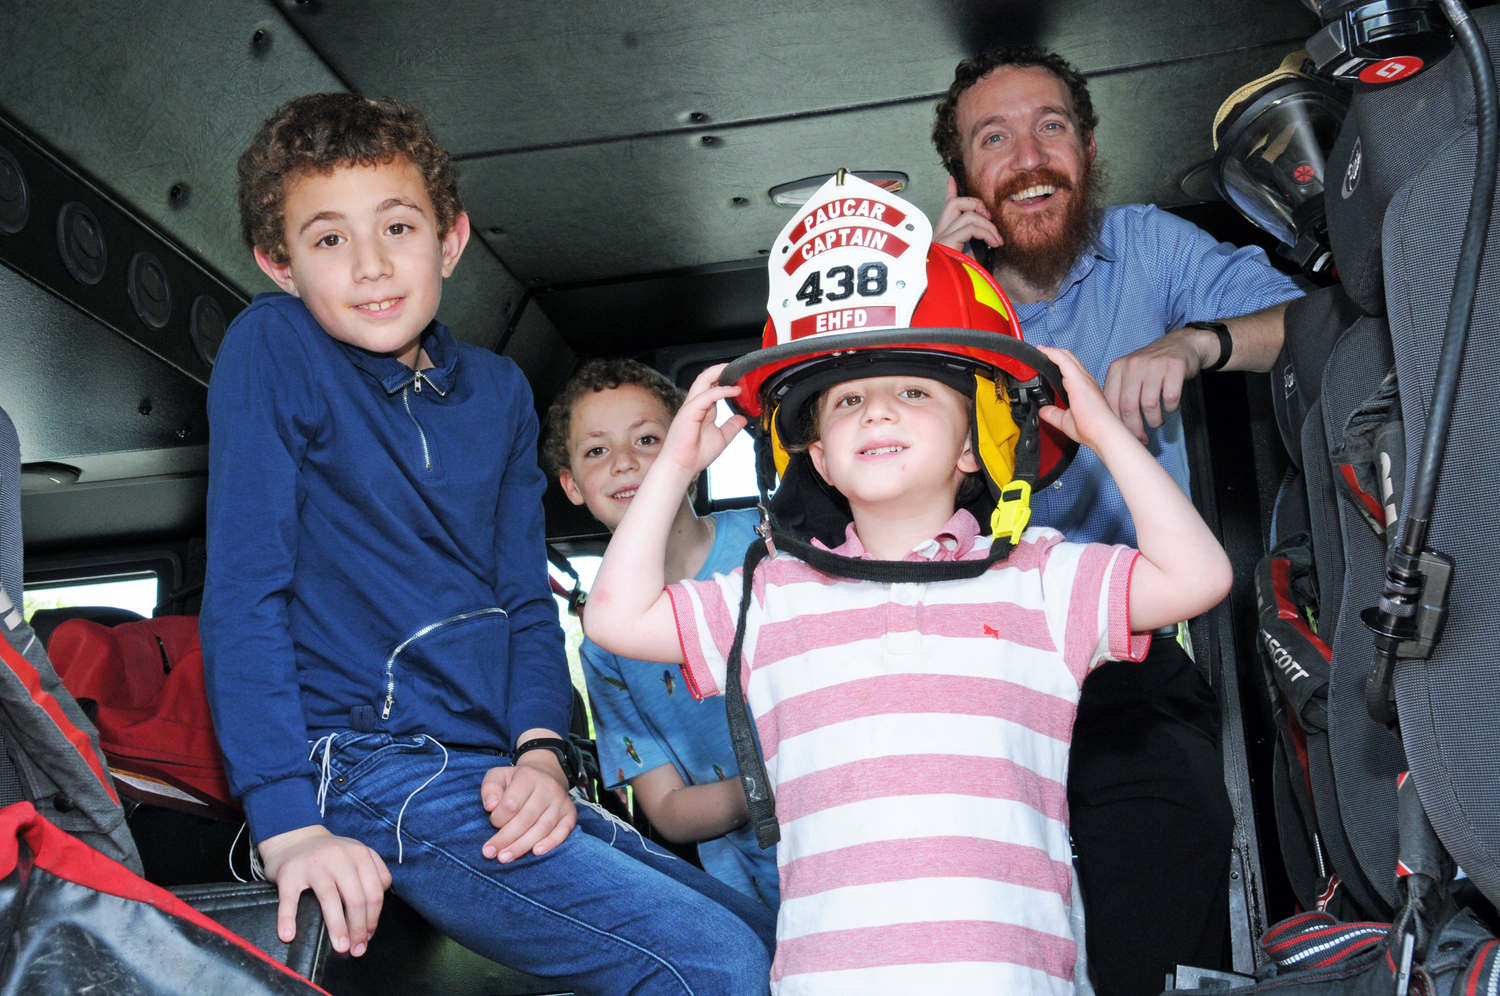 Sholom, Zelig, Shimon and Rabbi Aizik Baumgarten at the Clubhouse in East Hampton on Sunday for day of family fun and fire emergency service education. The East Hampton Fire Department Chiefs not only greeted attendees, but also brought 2 fire trucks for all ages to tour and to see close up what fire apparatus is all about, while enjoying free rounds of Mini Golf, food, drinks and live band music. Proceeds will benefit the future purchase of a locally touring Fire Safety House trailer, a full-featured scaled down home for learning fire prevention methods for every room of the home. RICHARD LEWIN